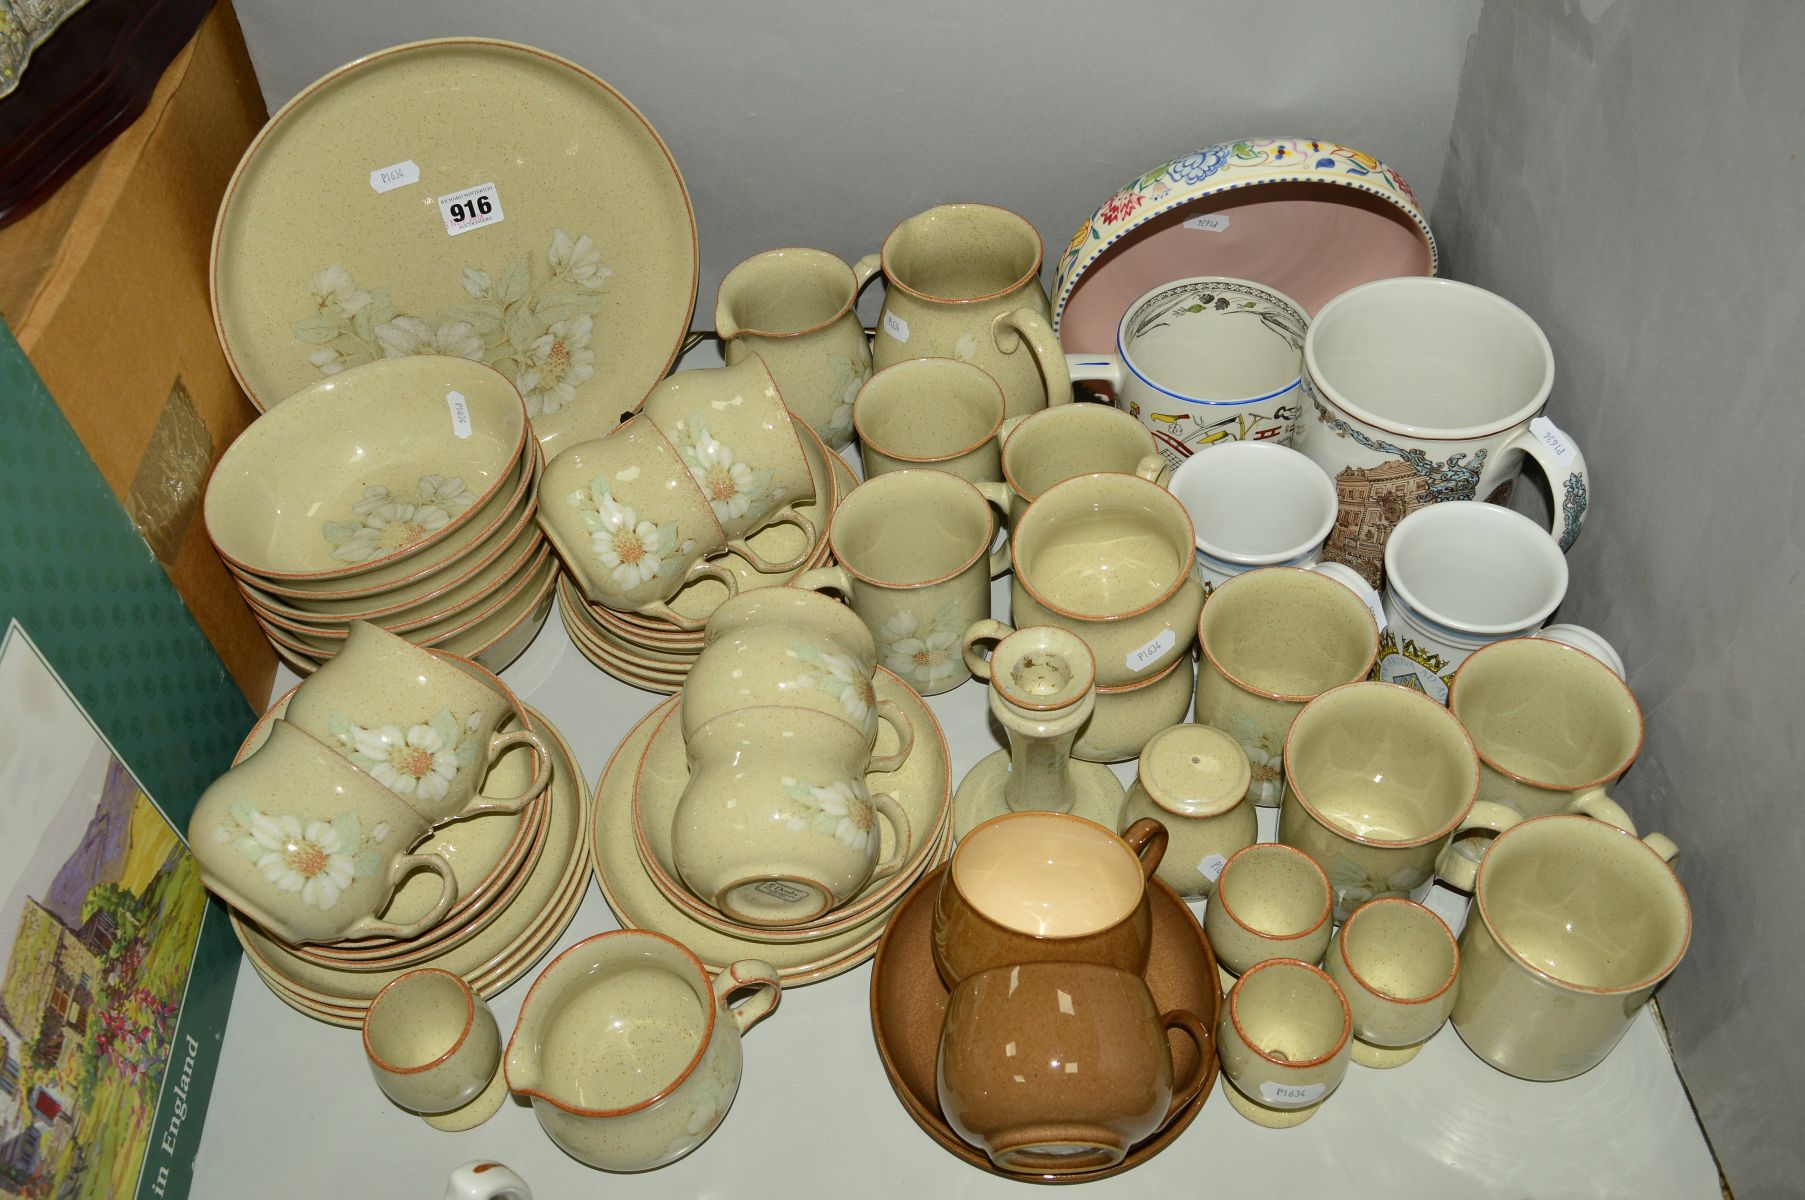 DENBY DAYBREAK TEA/DINNER WARES ETC, to include bowls, jugs, cups, saucers, mugs and egg cups, Denby